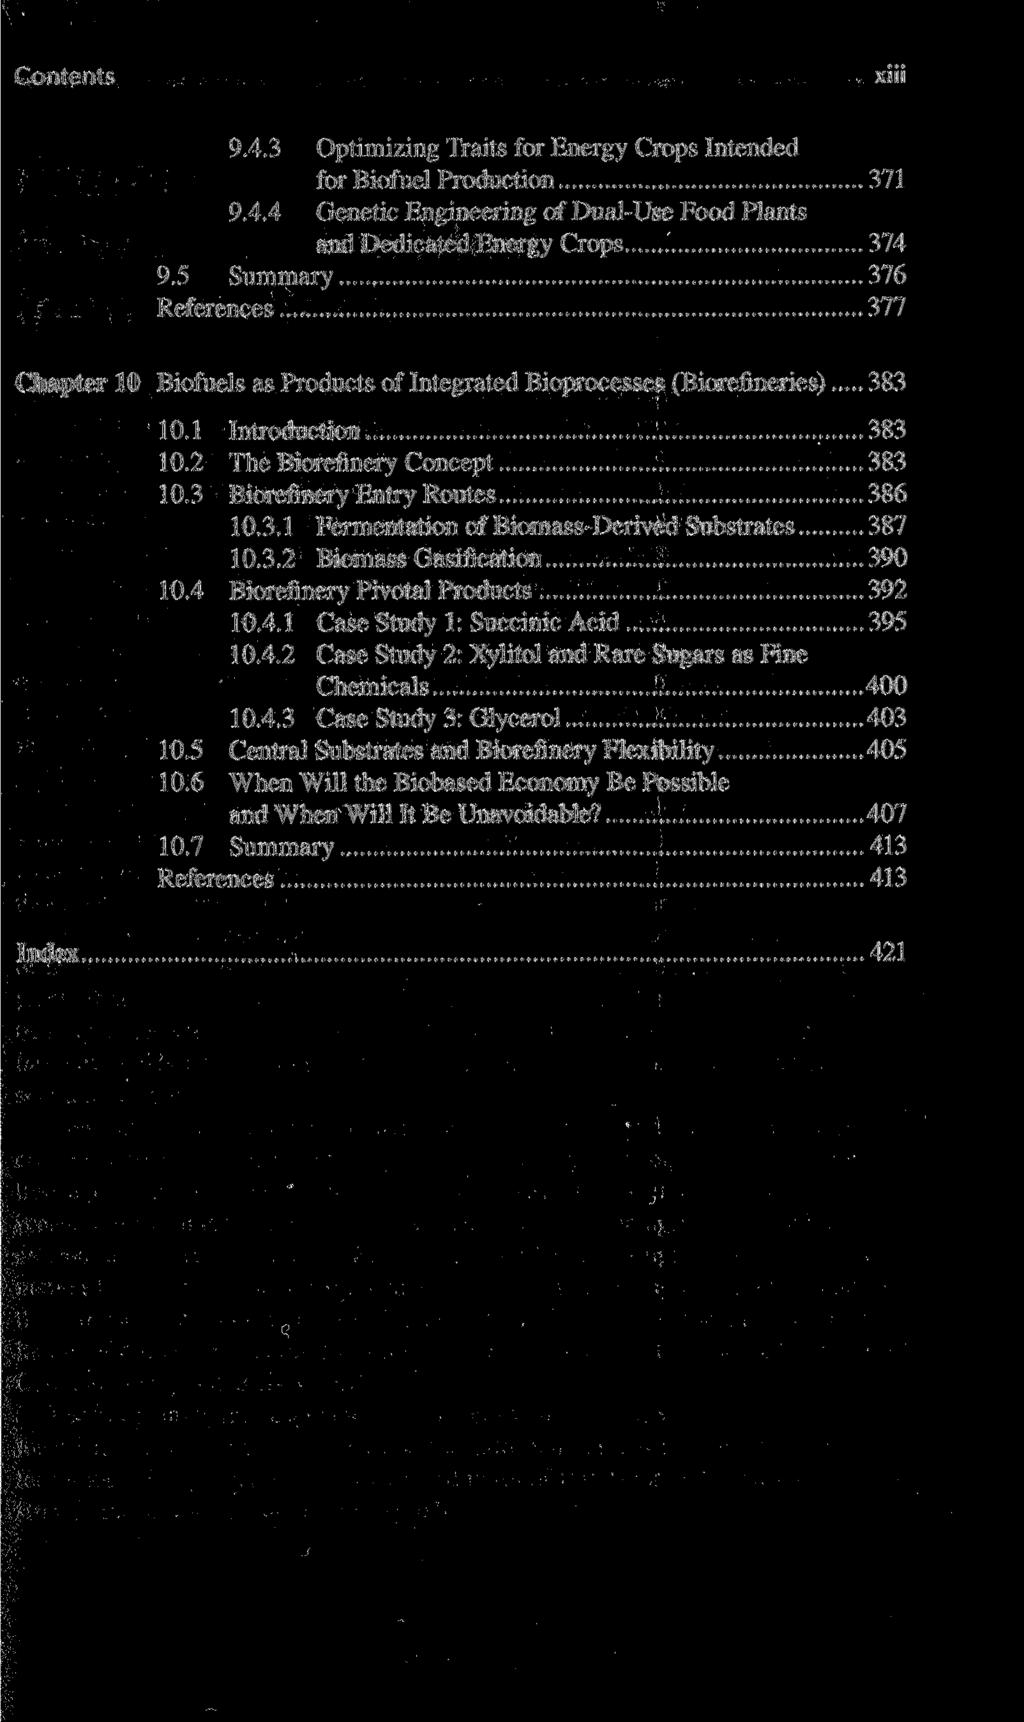 Contents xiii 9.4.3 Optimizing Traits for Energy Crops Intended forbiofuel Production 371 9.4.4 Genetic Engineering of Dual-Use Food Plants and Dedicated Energy Crops 374 9.